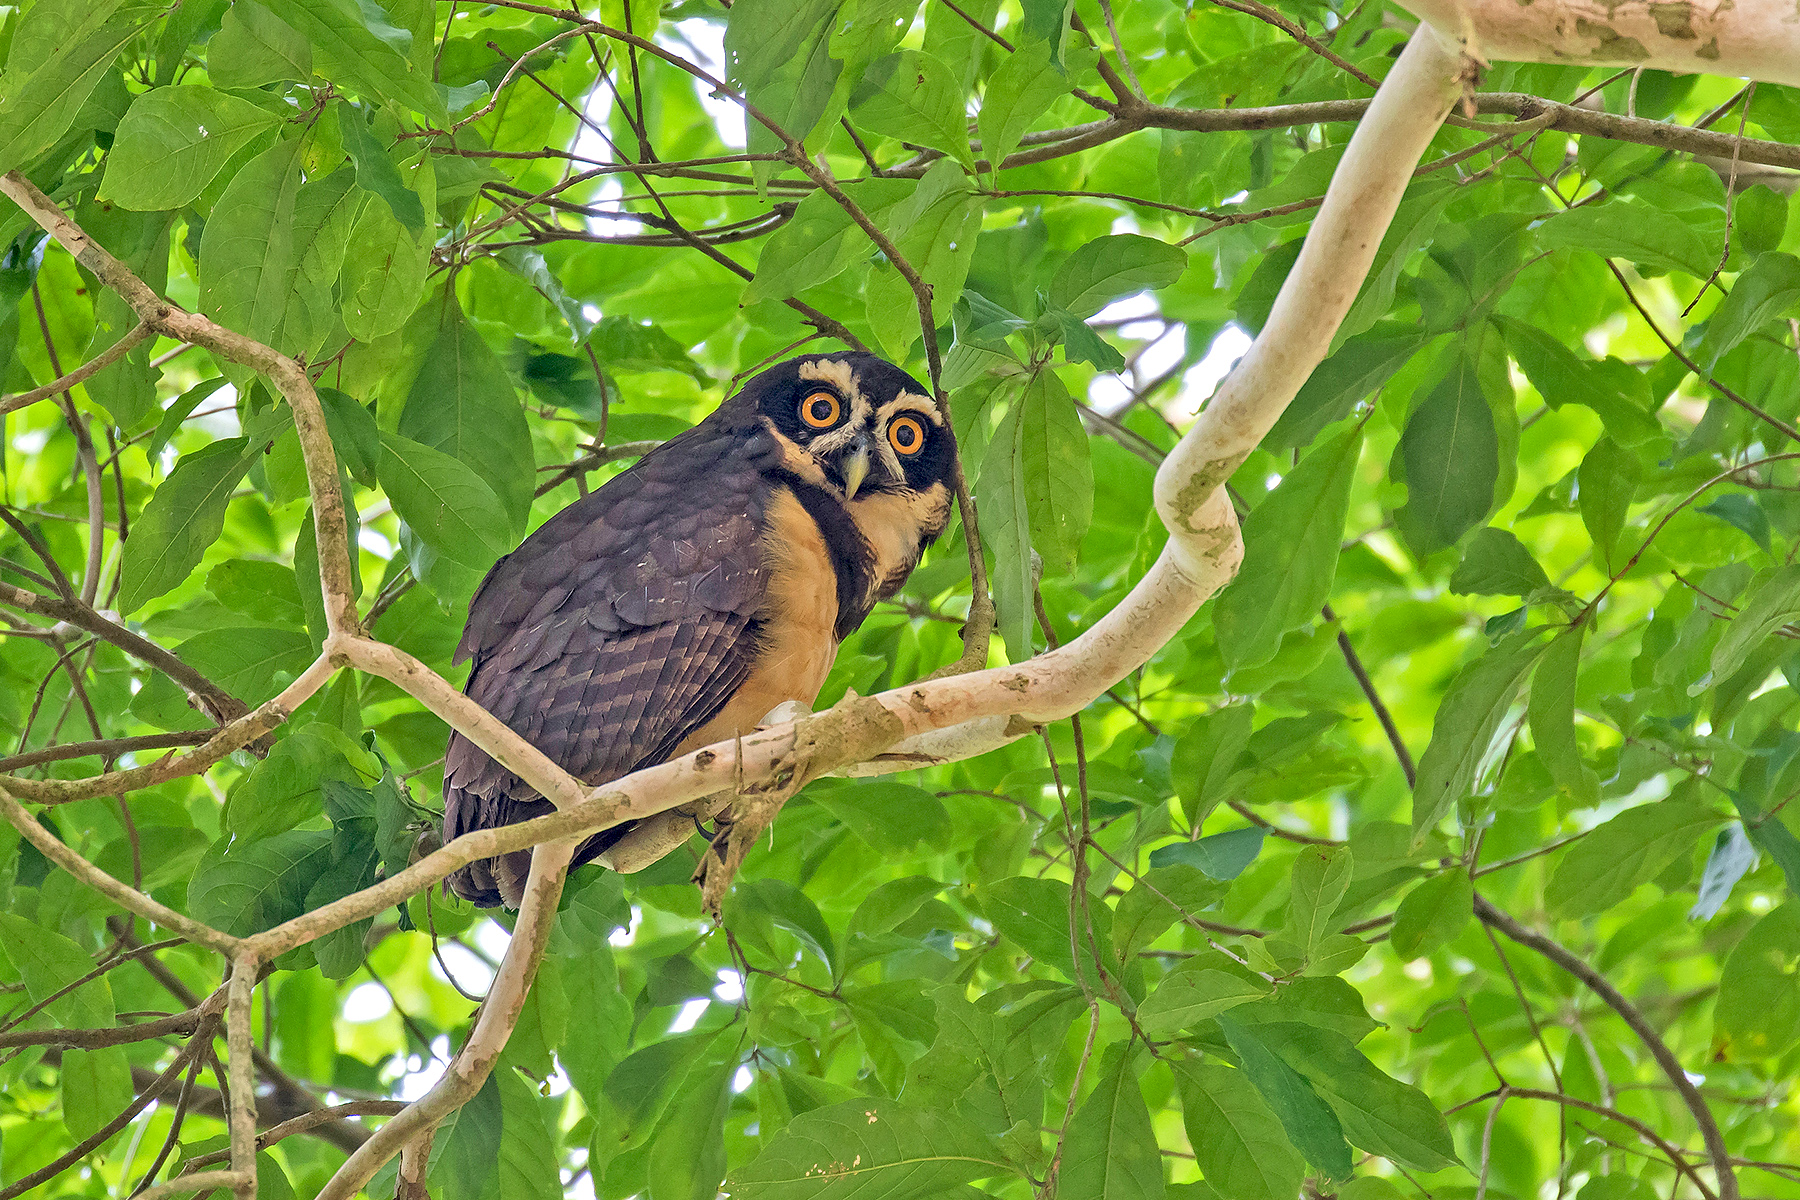 Spectacled Owl (image by Pete Morris)